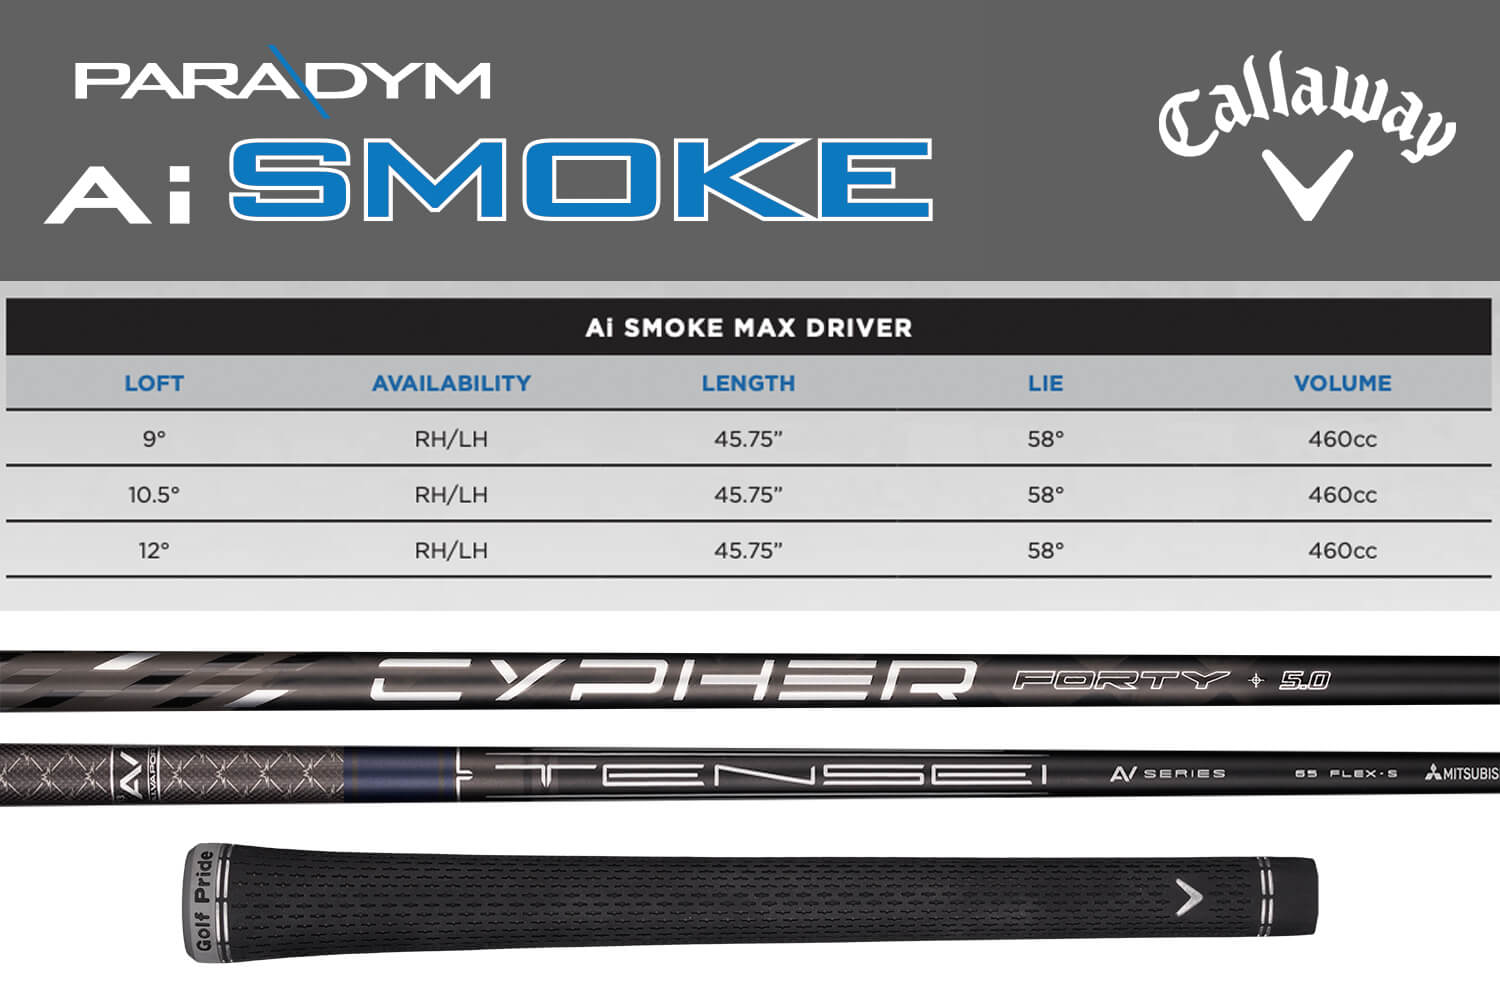 Specification for Callaway Paradym Ai Smoke Max Golf Driver